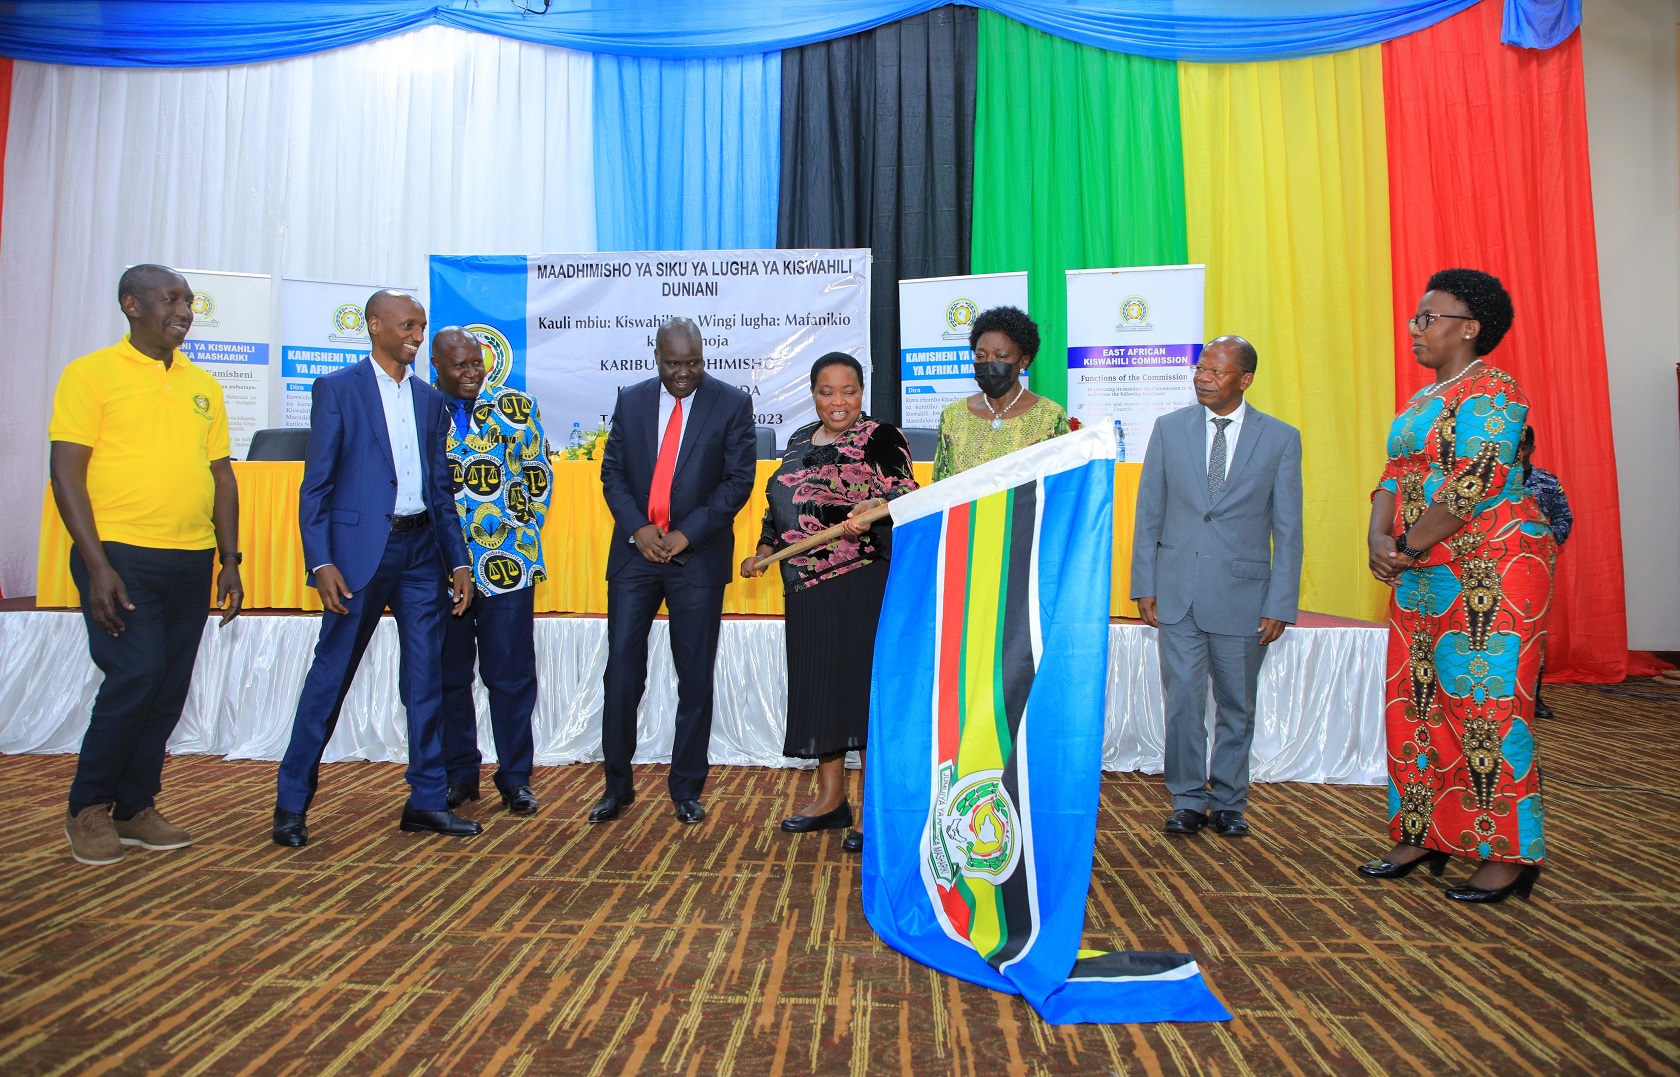 The Prime Minister of Uganda, Hon. Robinah Nabbanja, holds the EAC flag before handing over to the delegation from the Republic of Rwanda. Rwanda will be hosting the 3rd EAC Kiswahili Day celebrations in July 2024.